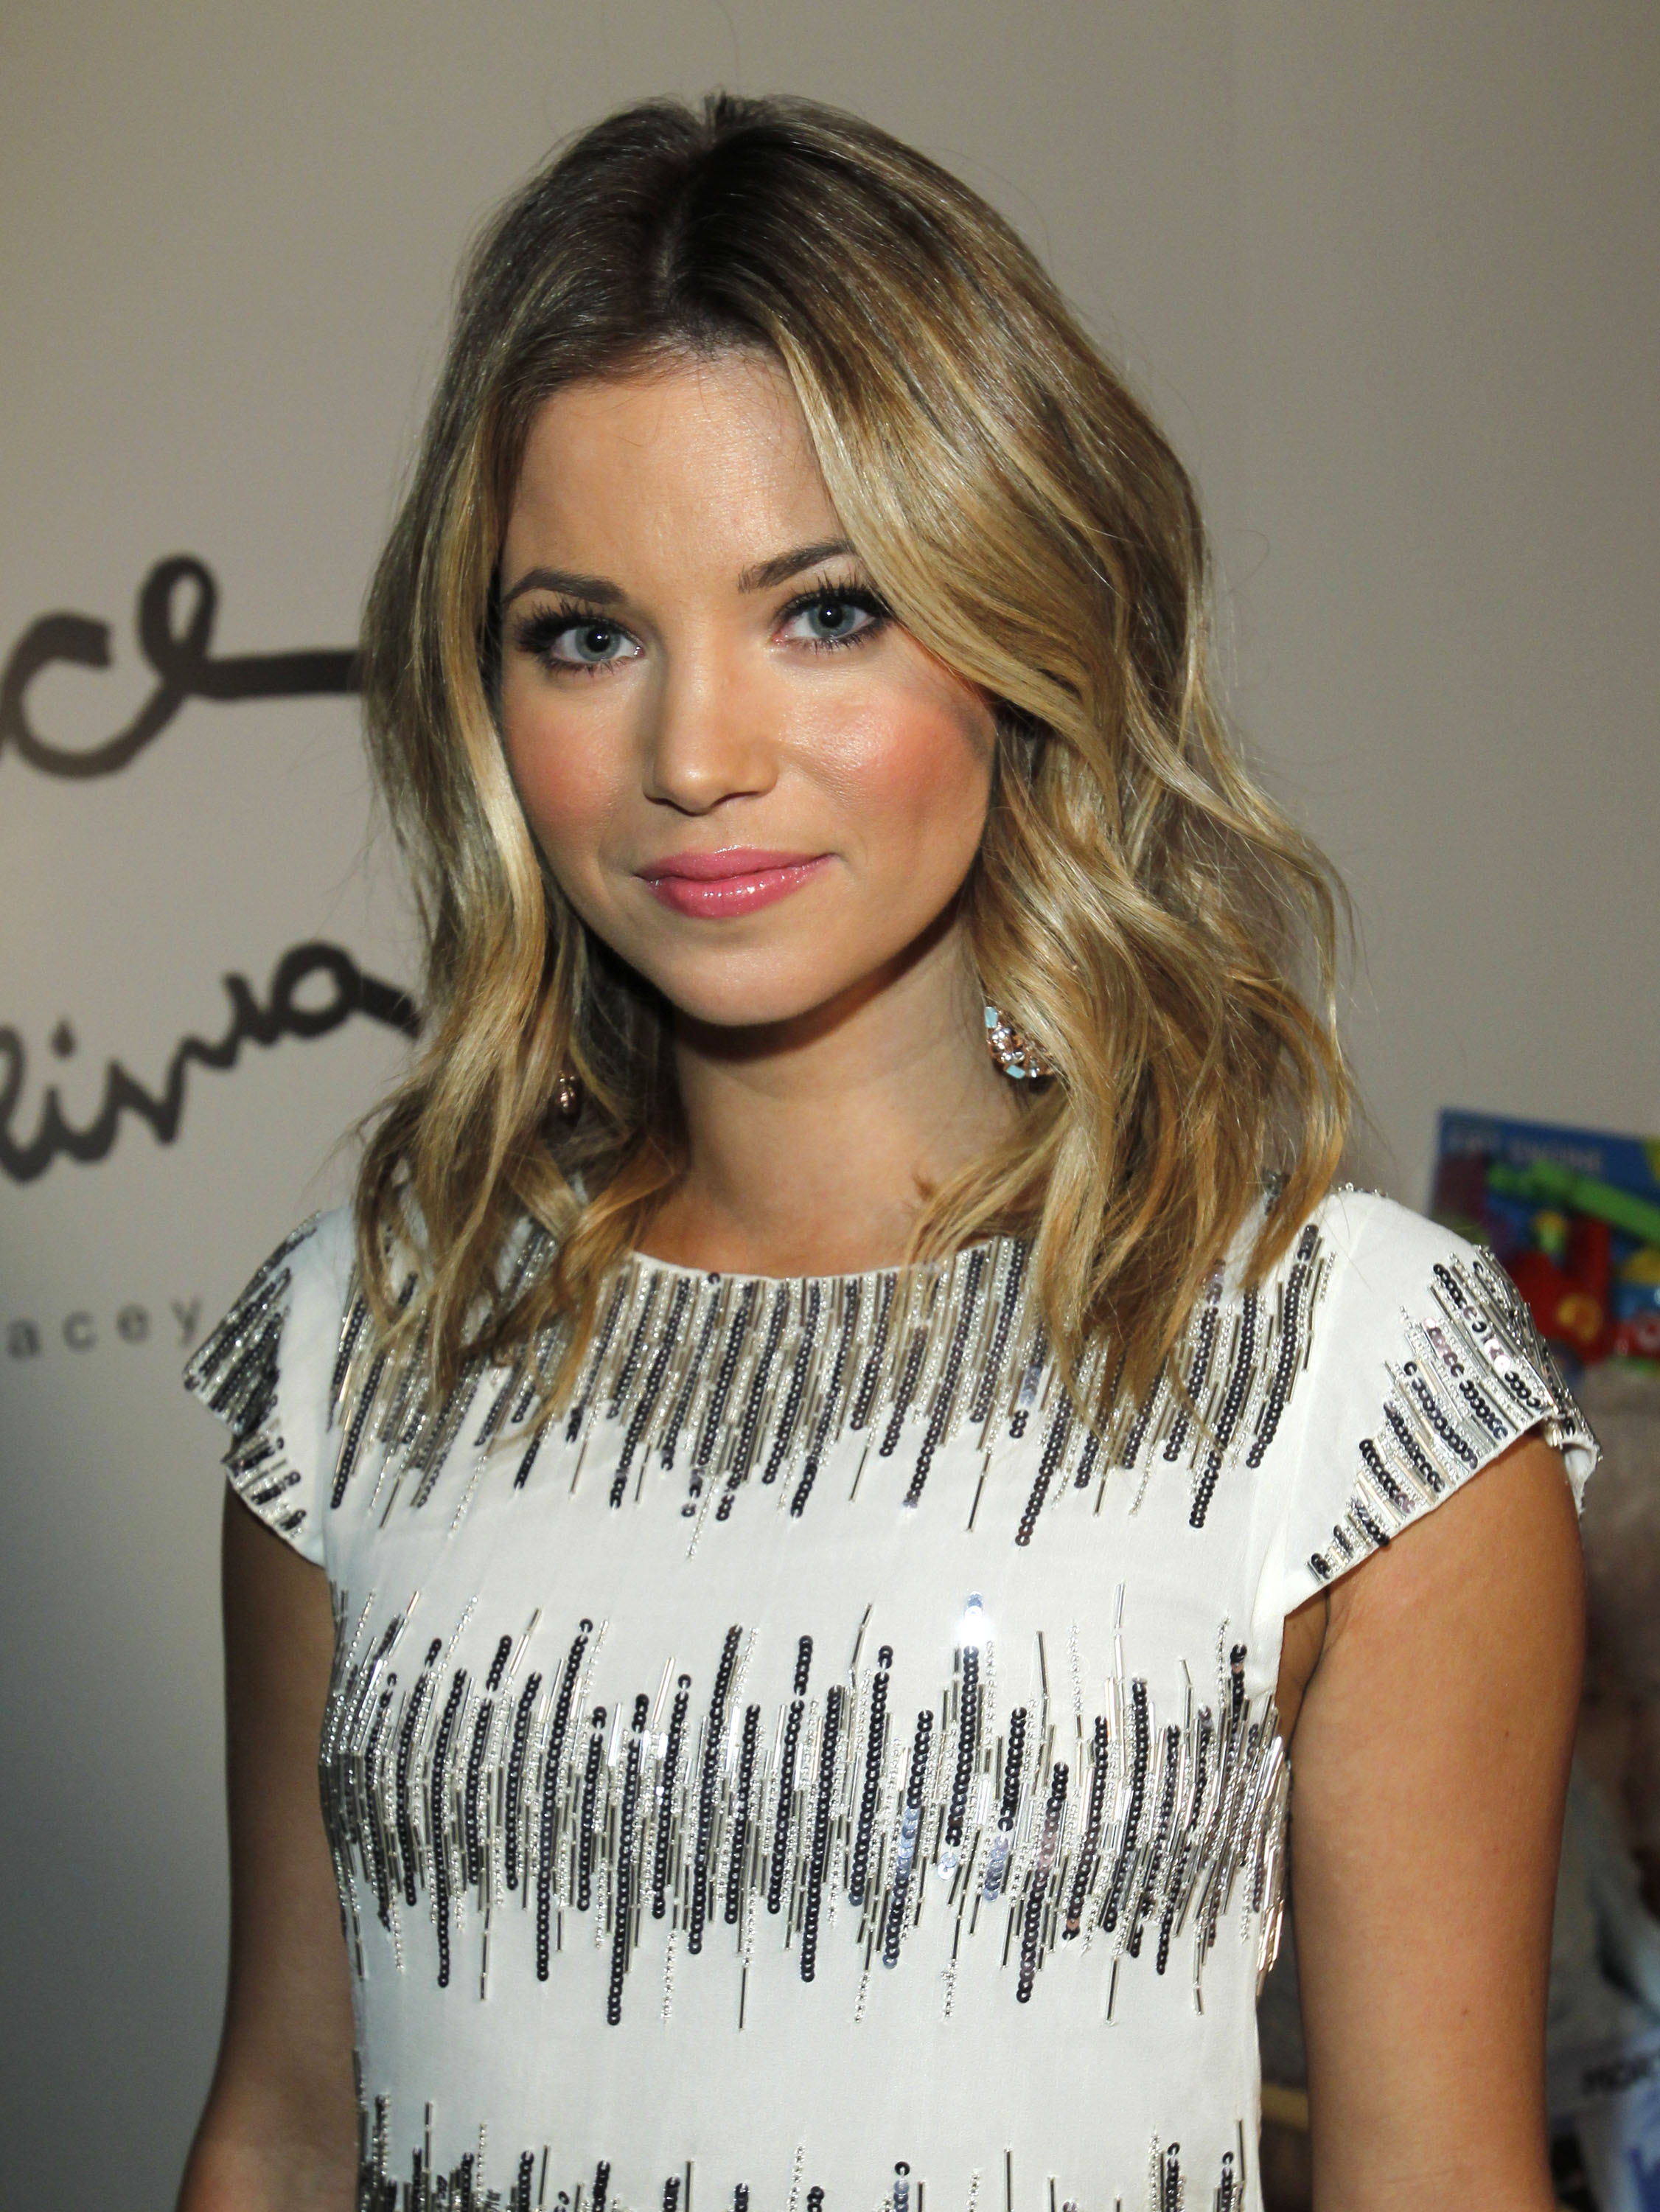 Amber Lancaster at the Alice Olivia party in West Hollywood